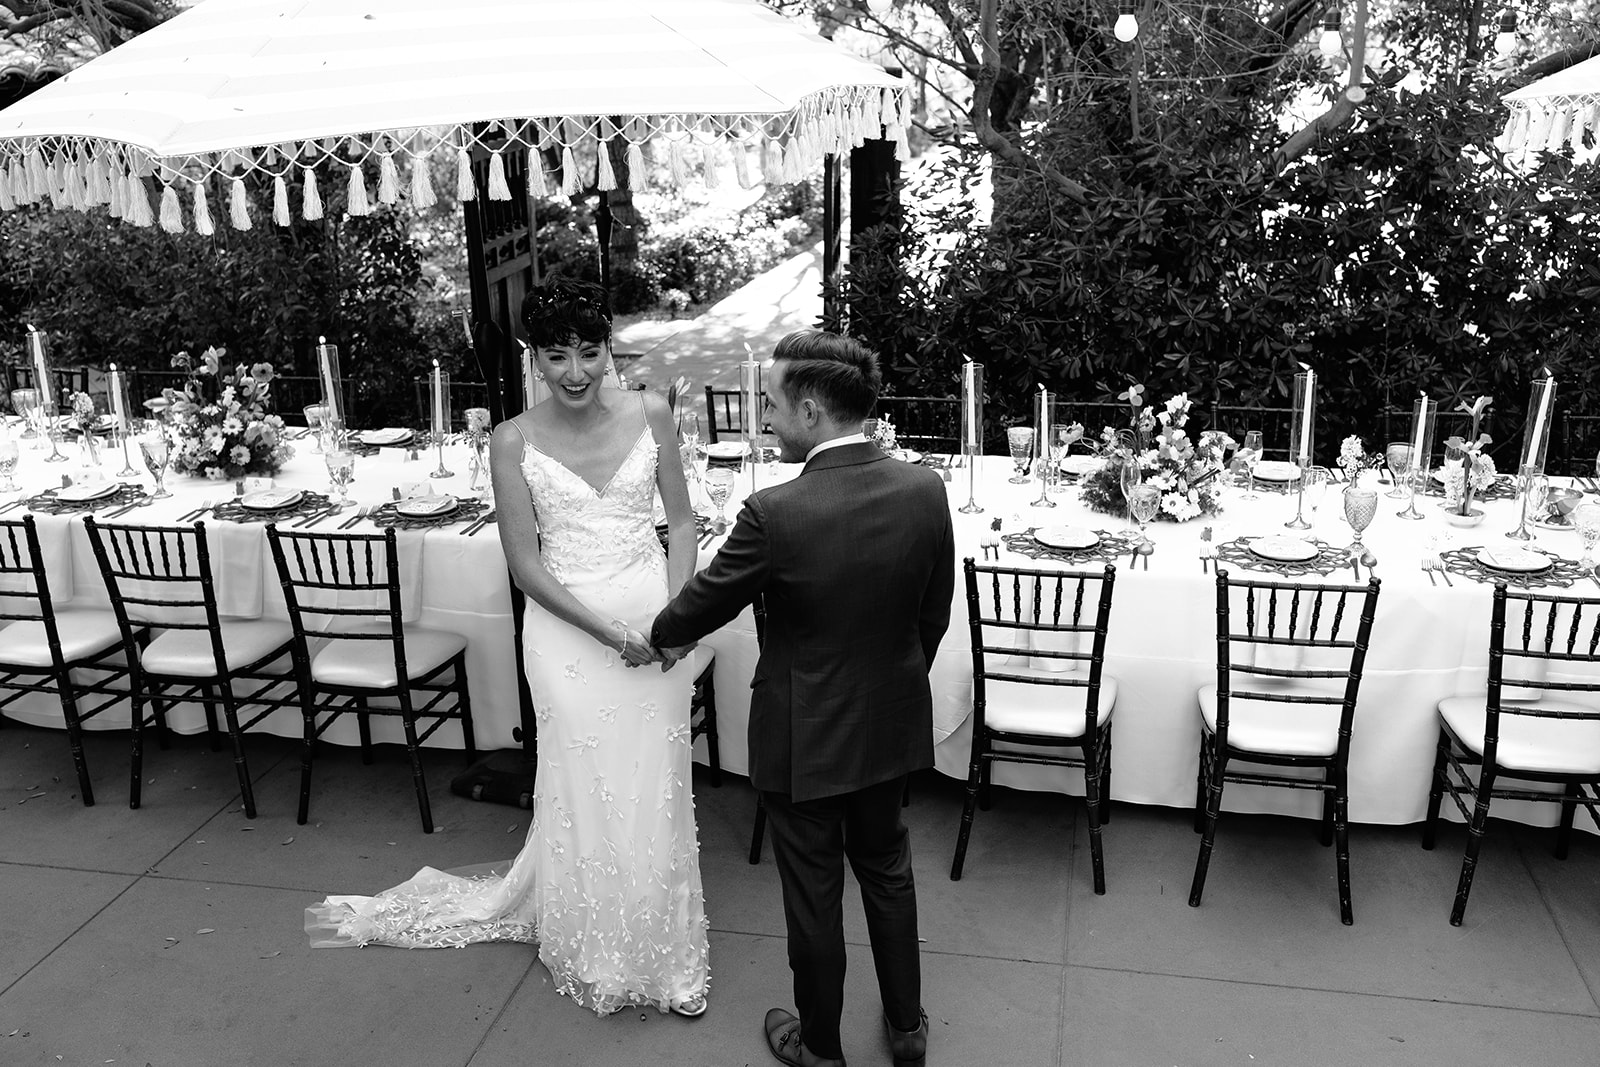 A bride and groom hold hands in front of a long, decorated table set for an outdoor wedding reception, beneath a large fringed umbrella.